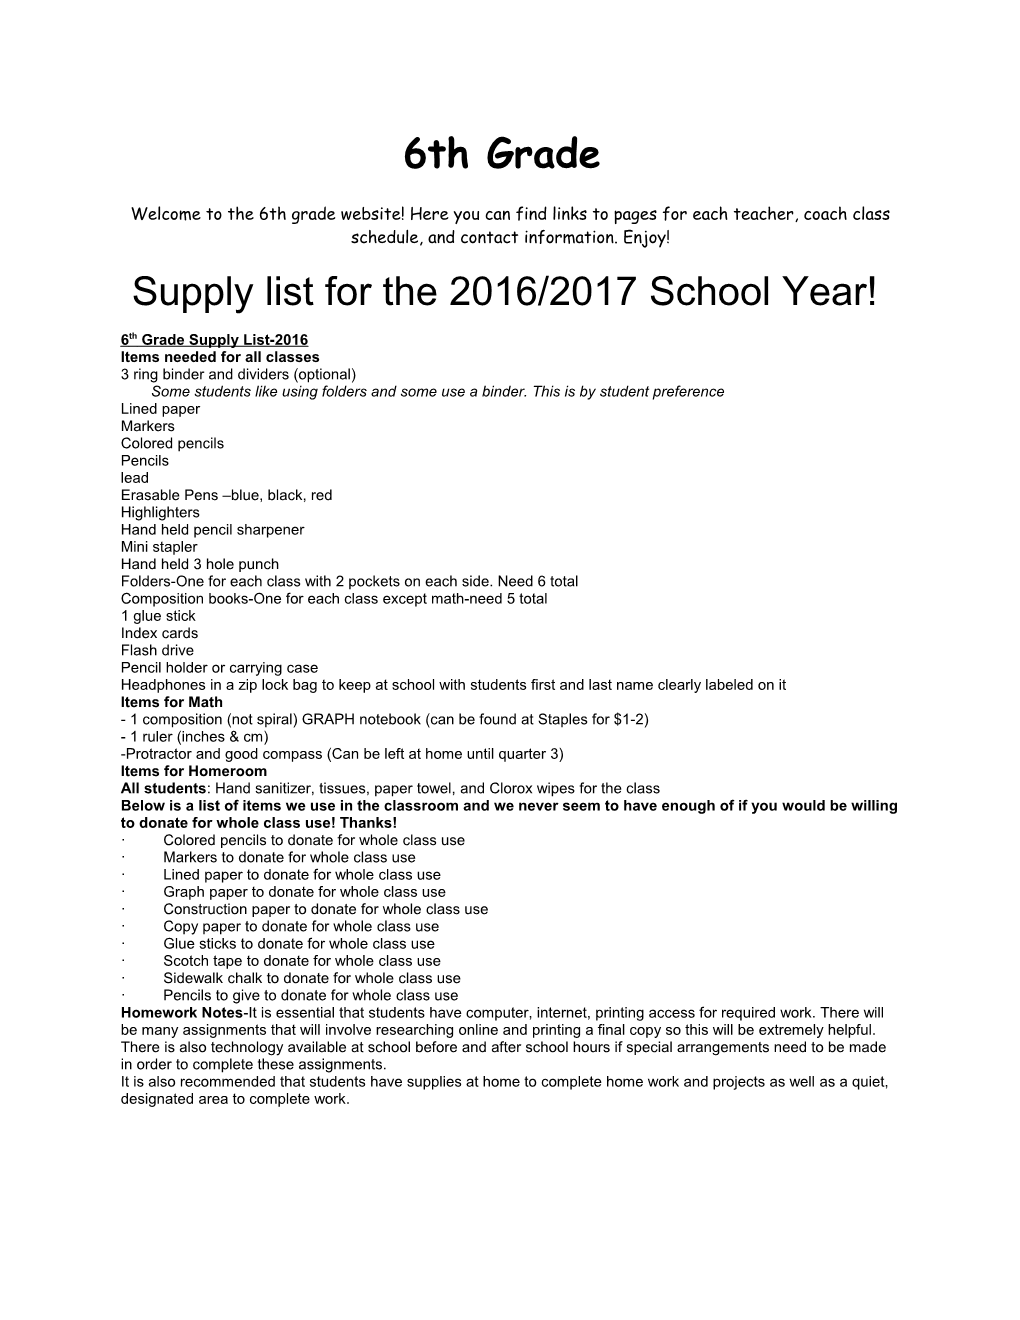 Supply List for the 2016/2017 School Year!